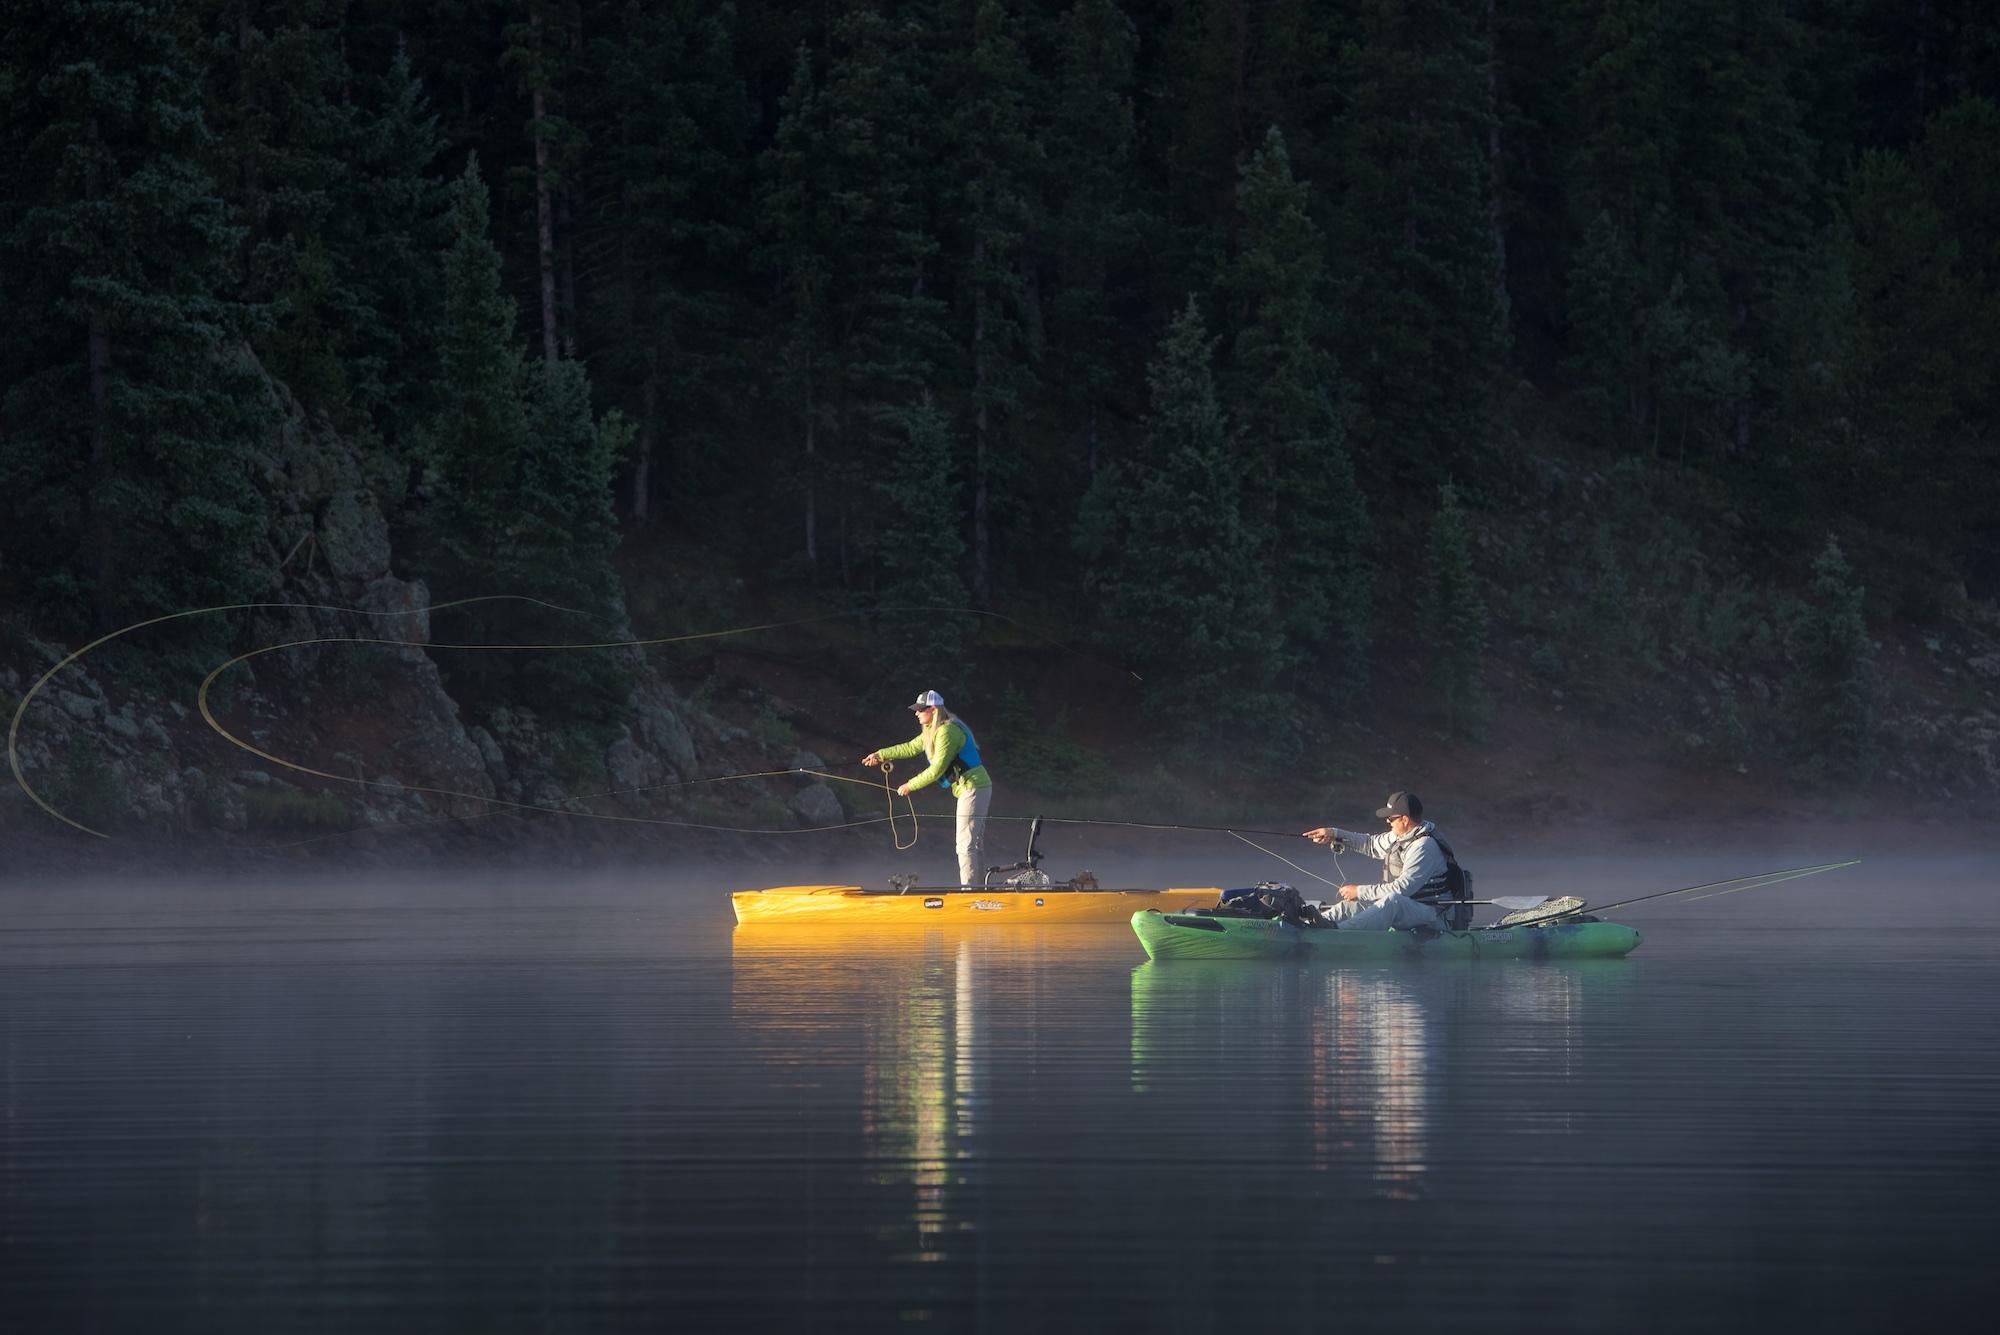 Fly Fishing Kayak, The Solo